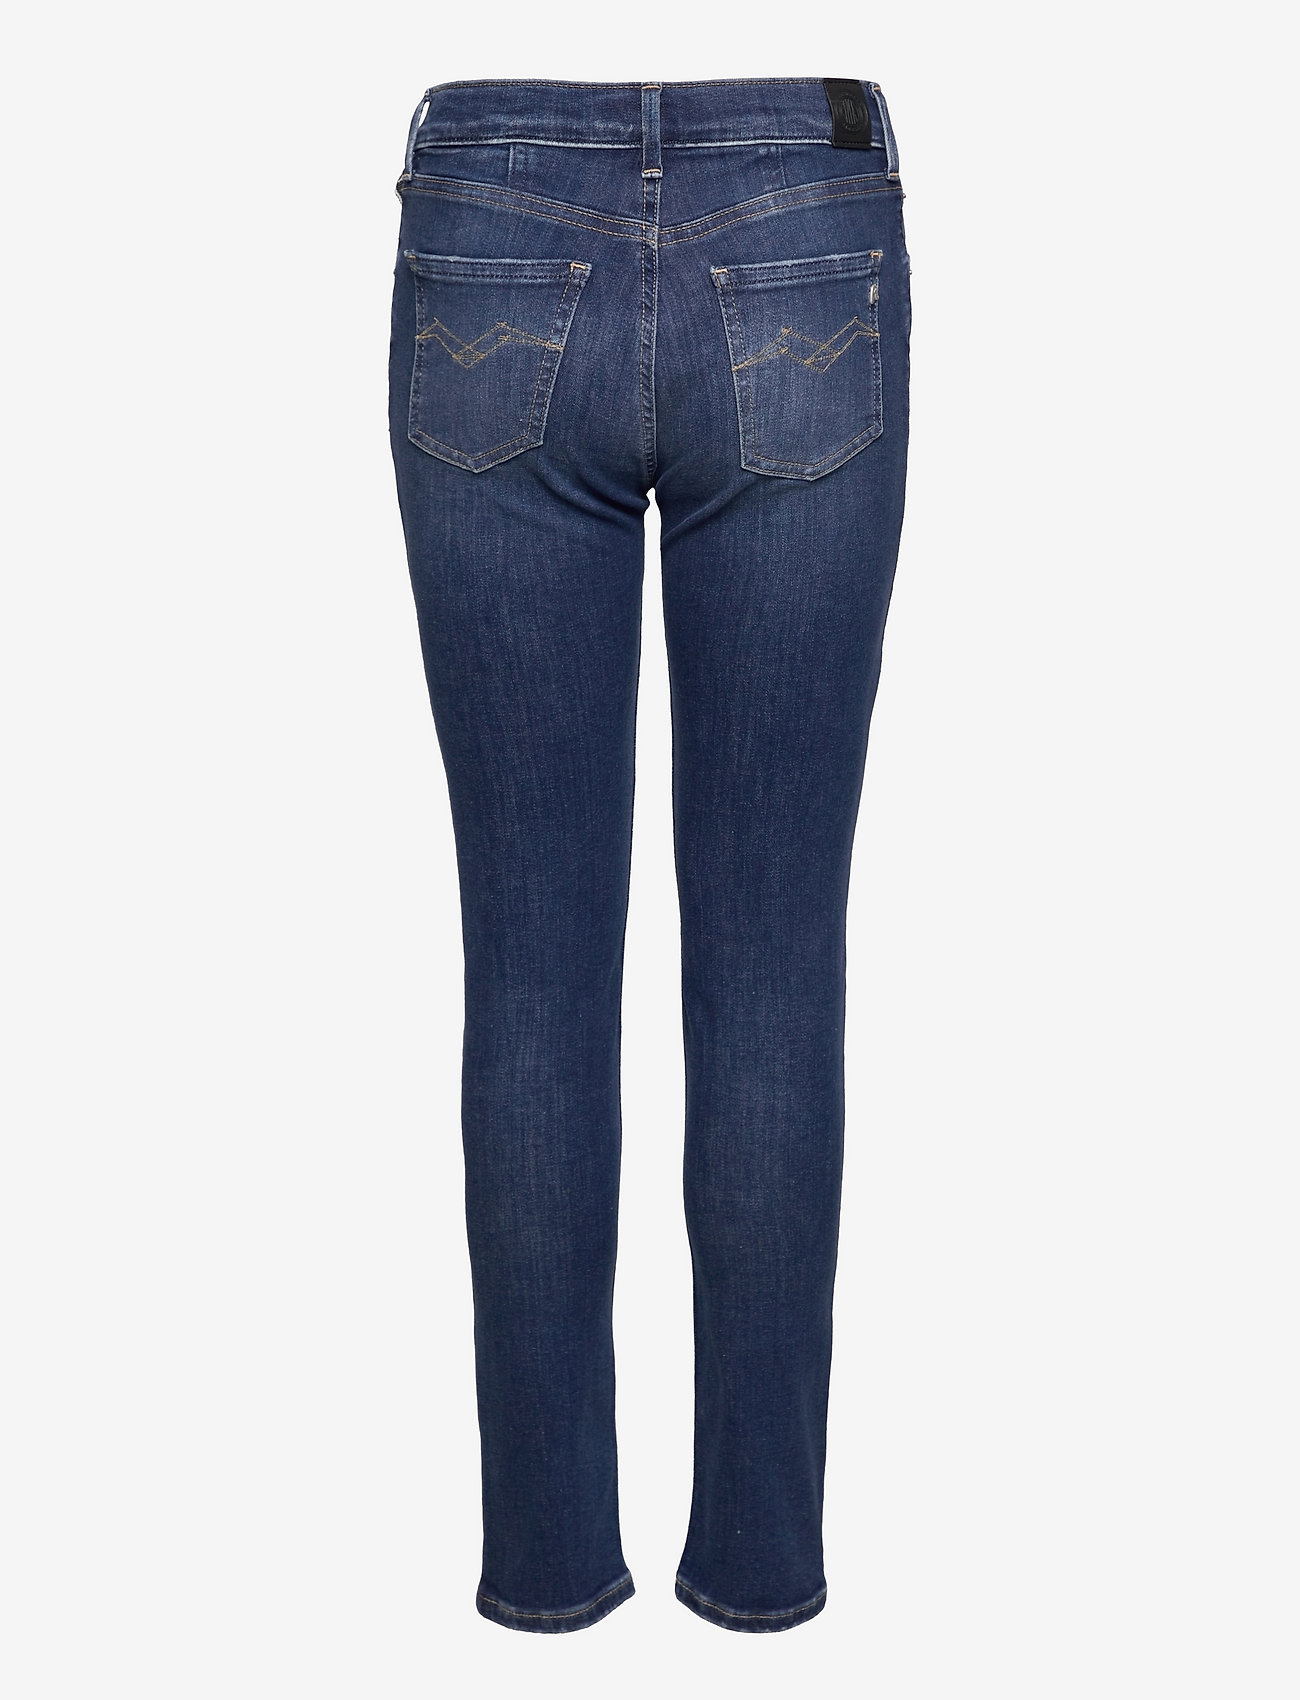 Replay - NELLIE Trousers - skinny jeans - medium blue - 1